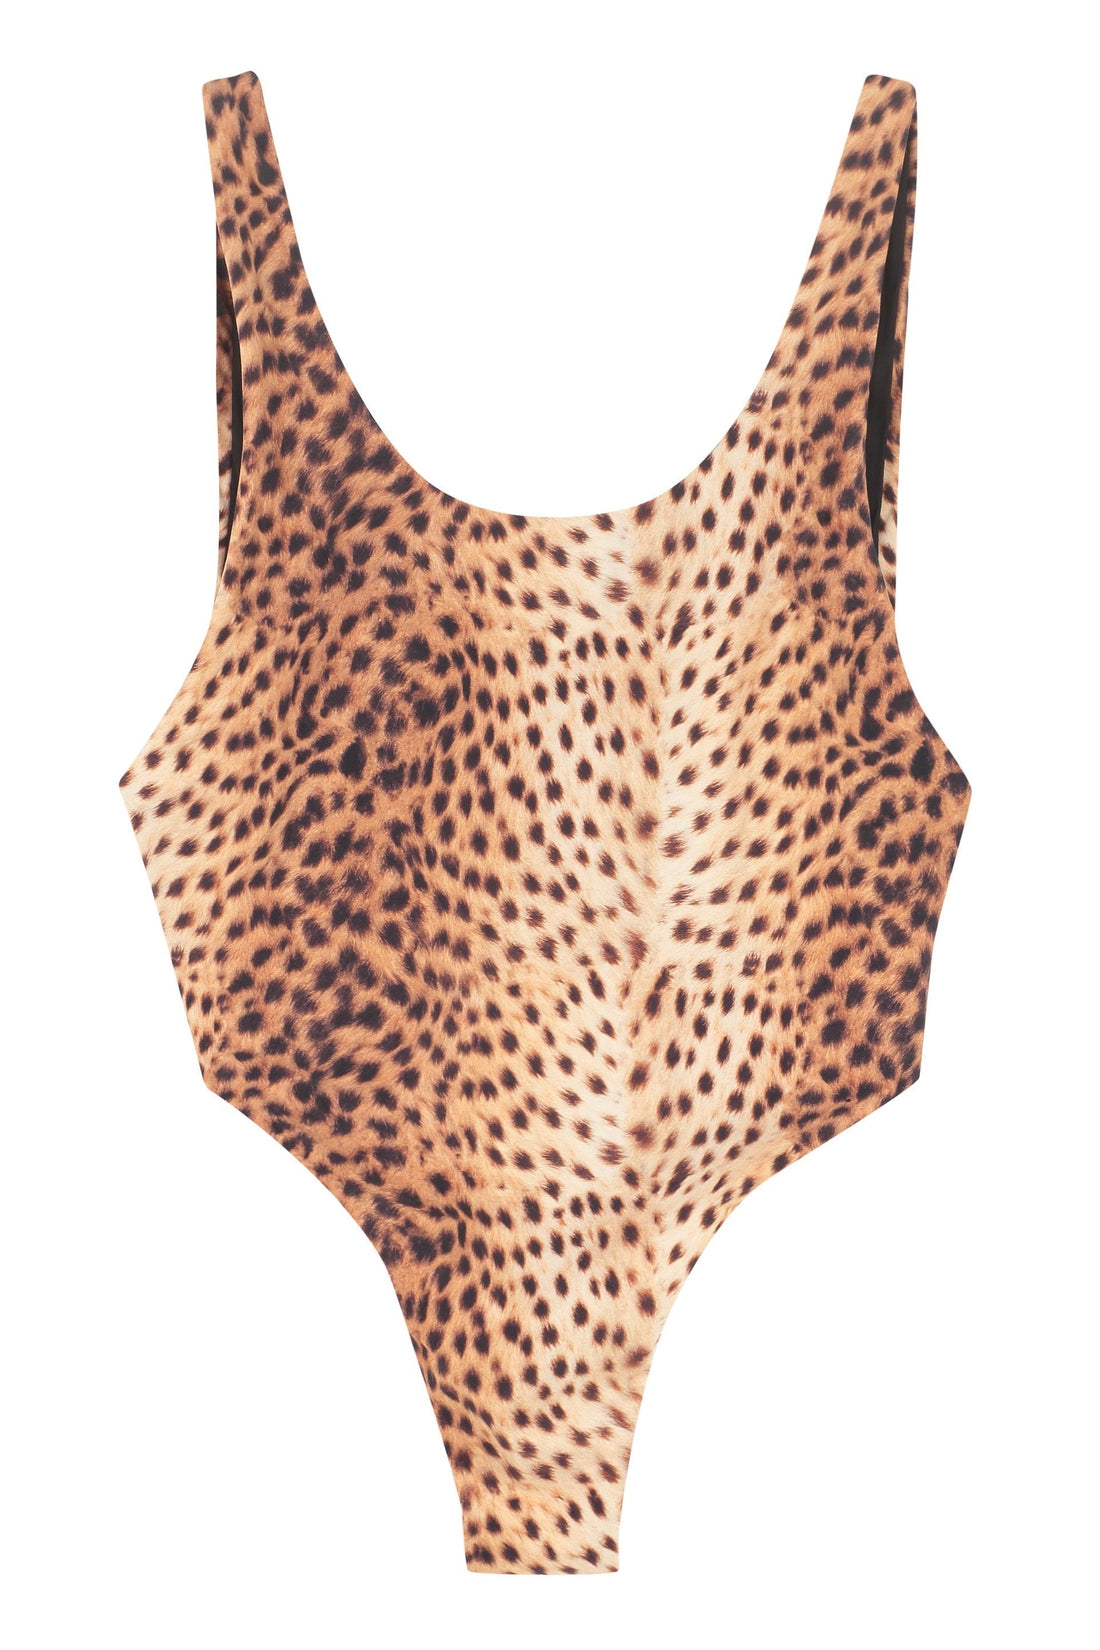 Reina Olga-OUTLET-SALE-Funky one-piece swimsuit-ARCHIVIST